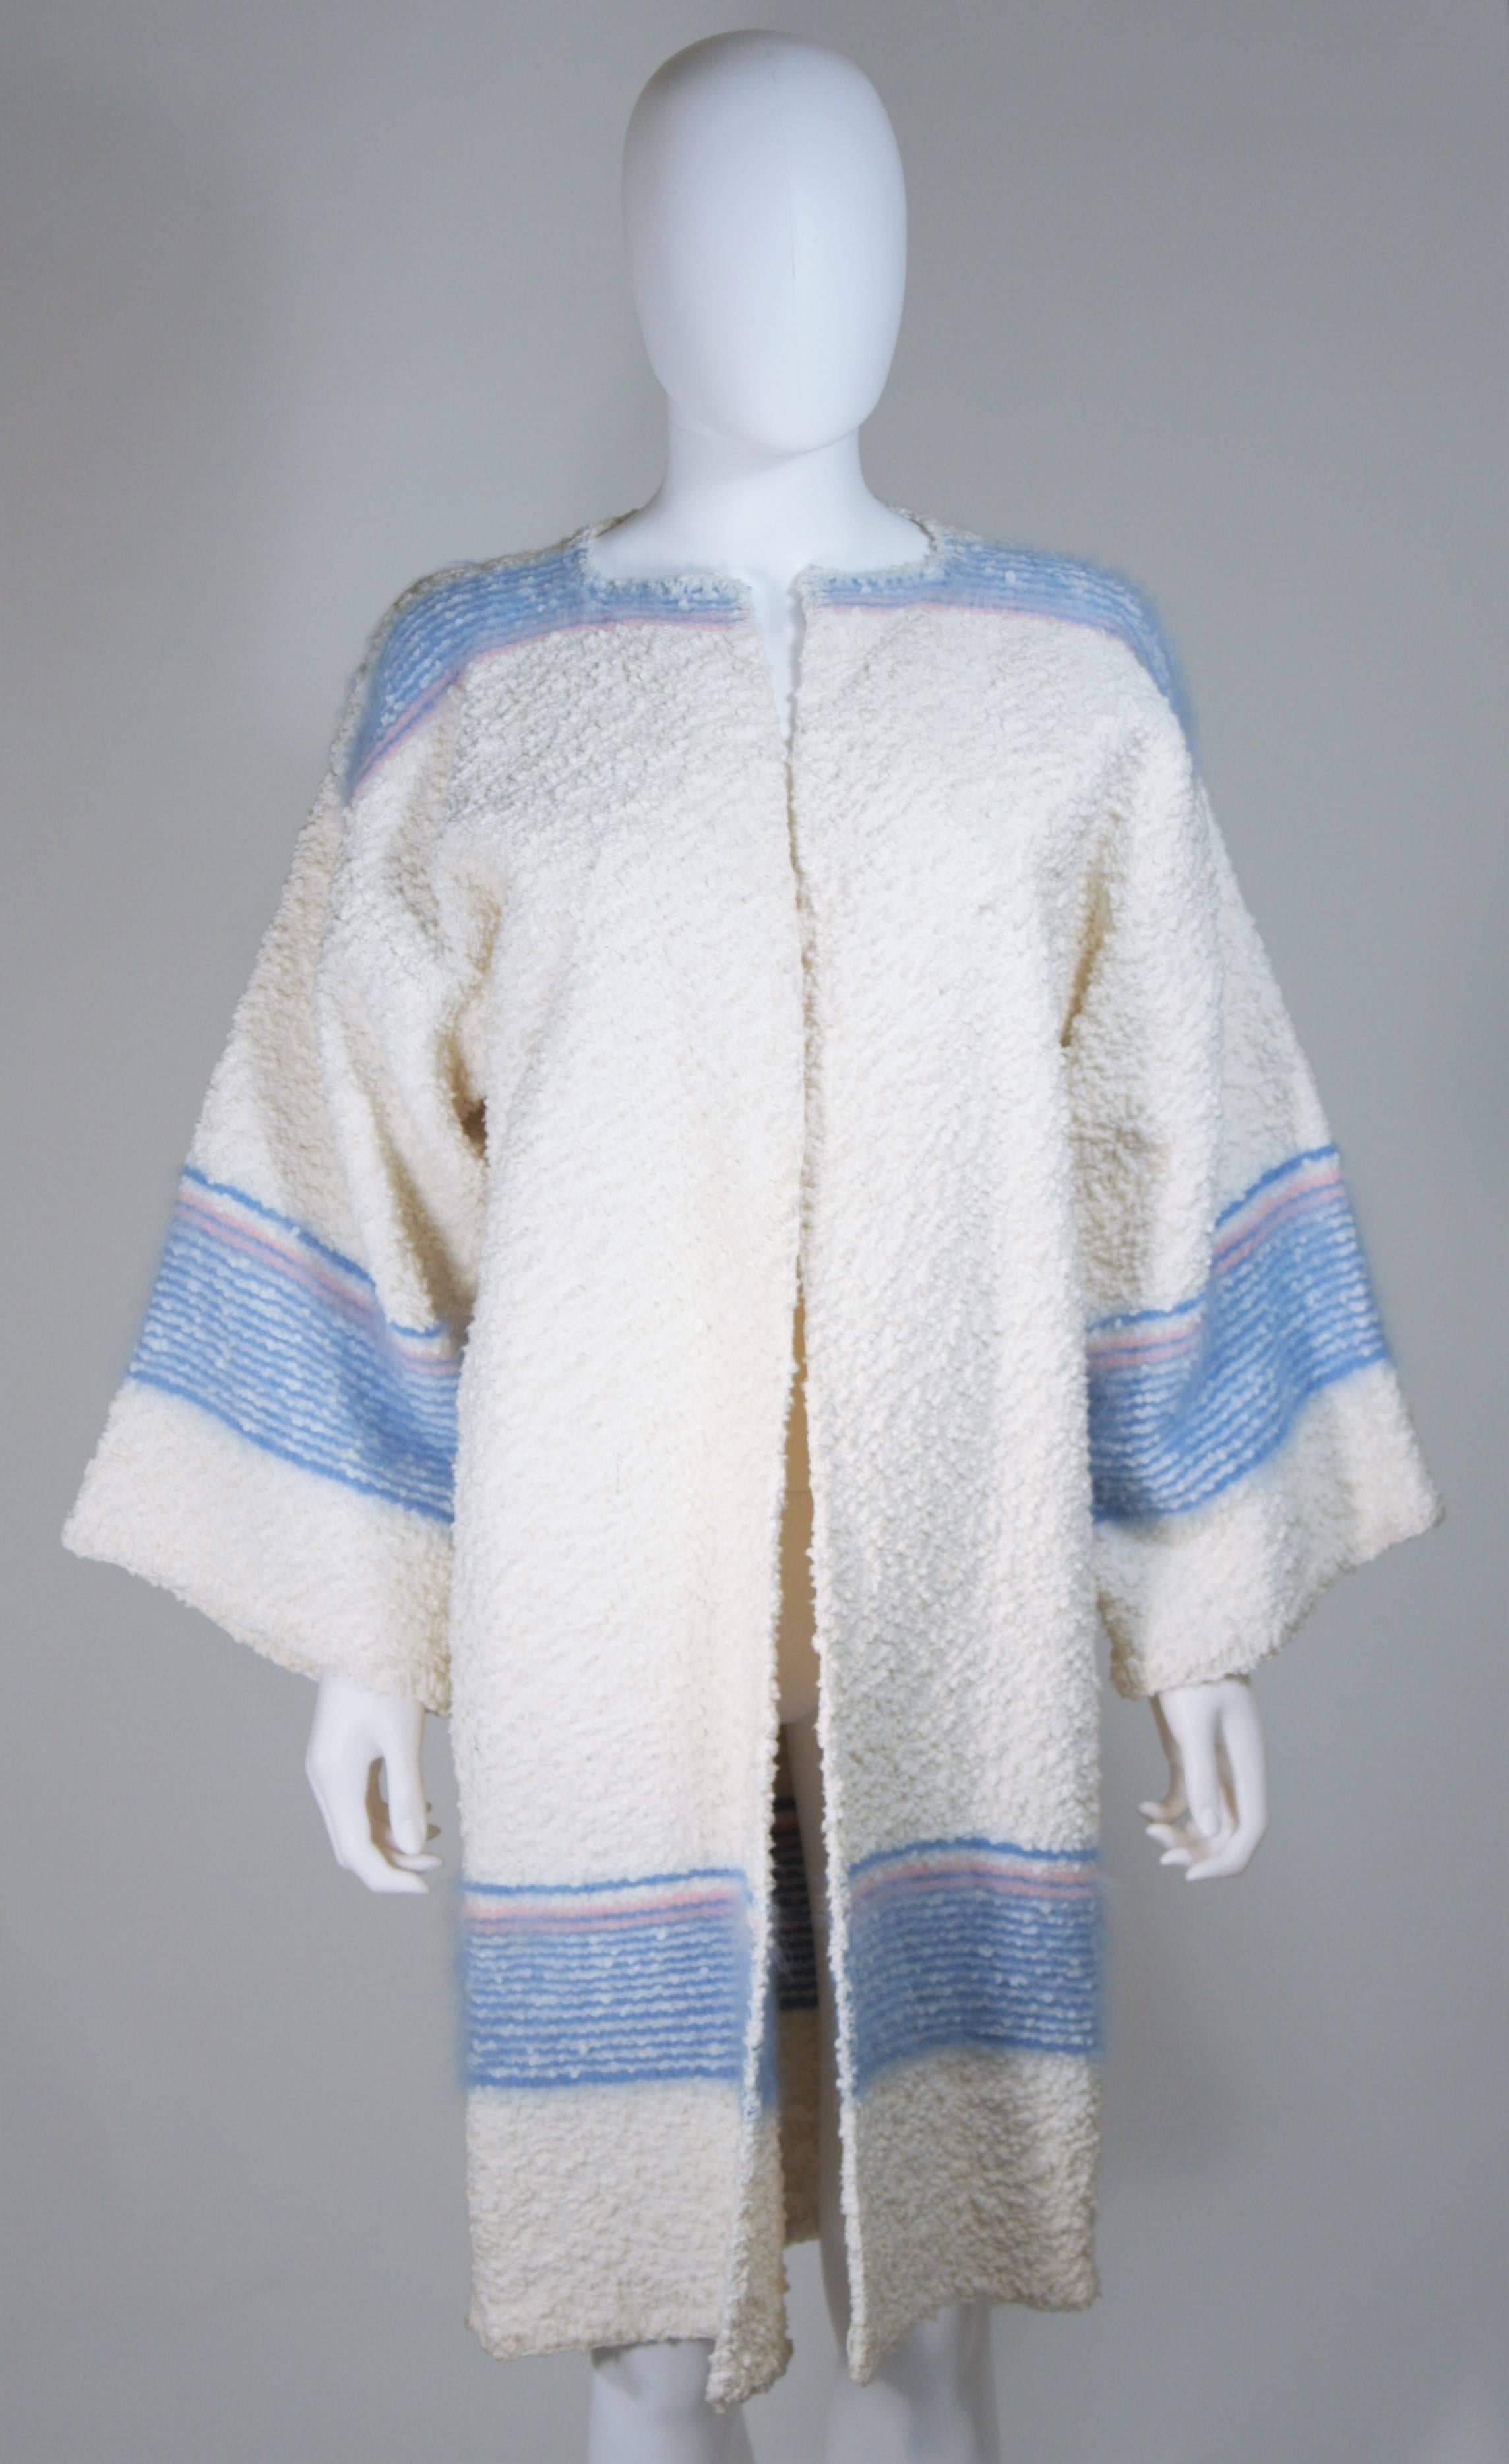 MICHAELE VOLLBRACHT Circa 1980's Boucle Wool and Angora Knit Sweater  In Excellent Condition For Sale In Los Angeles, CA